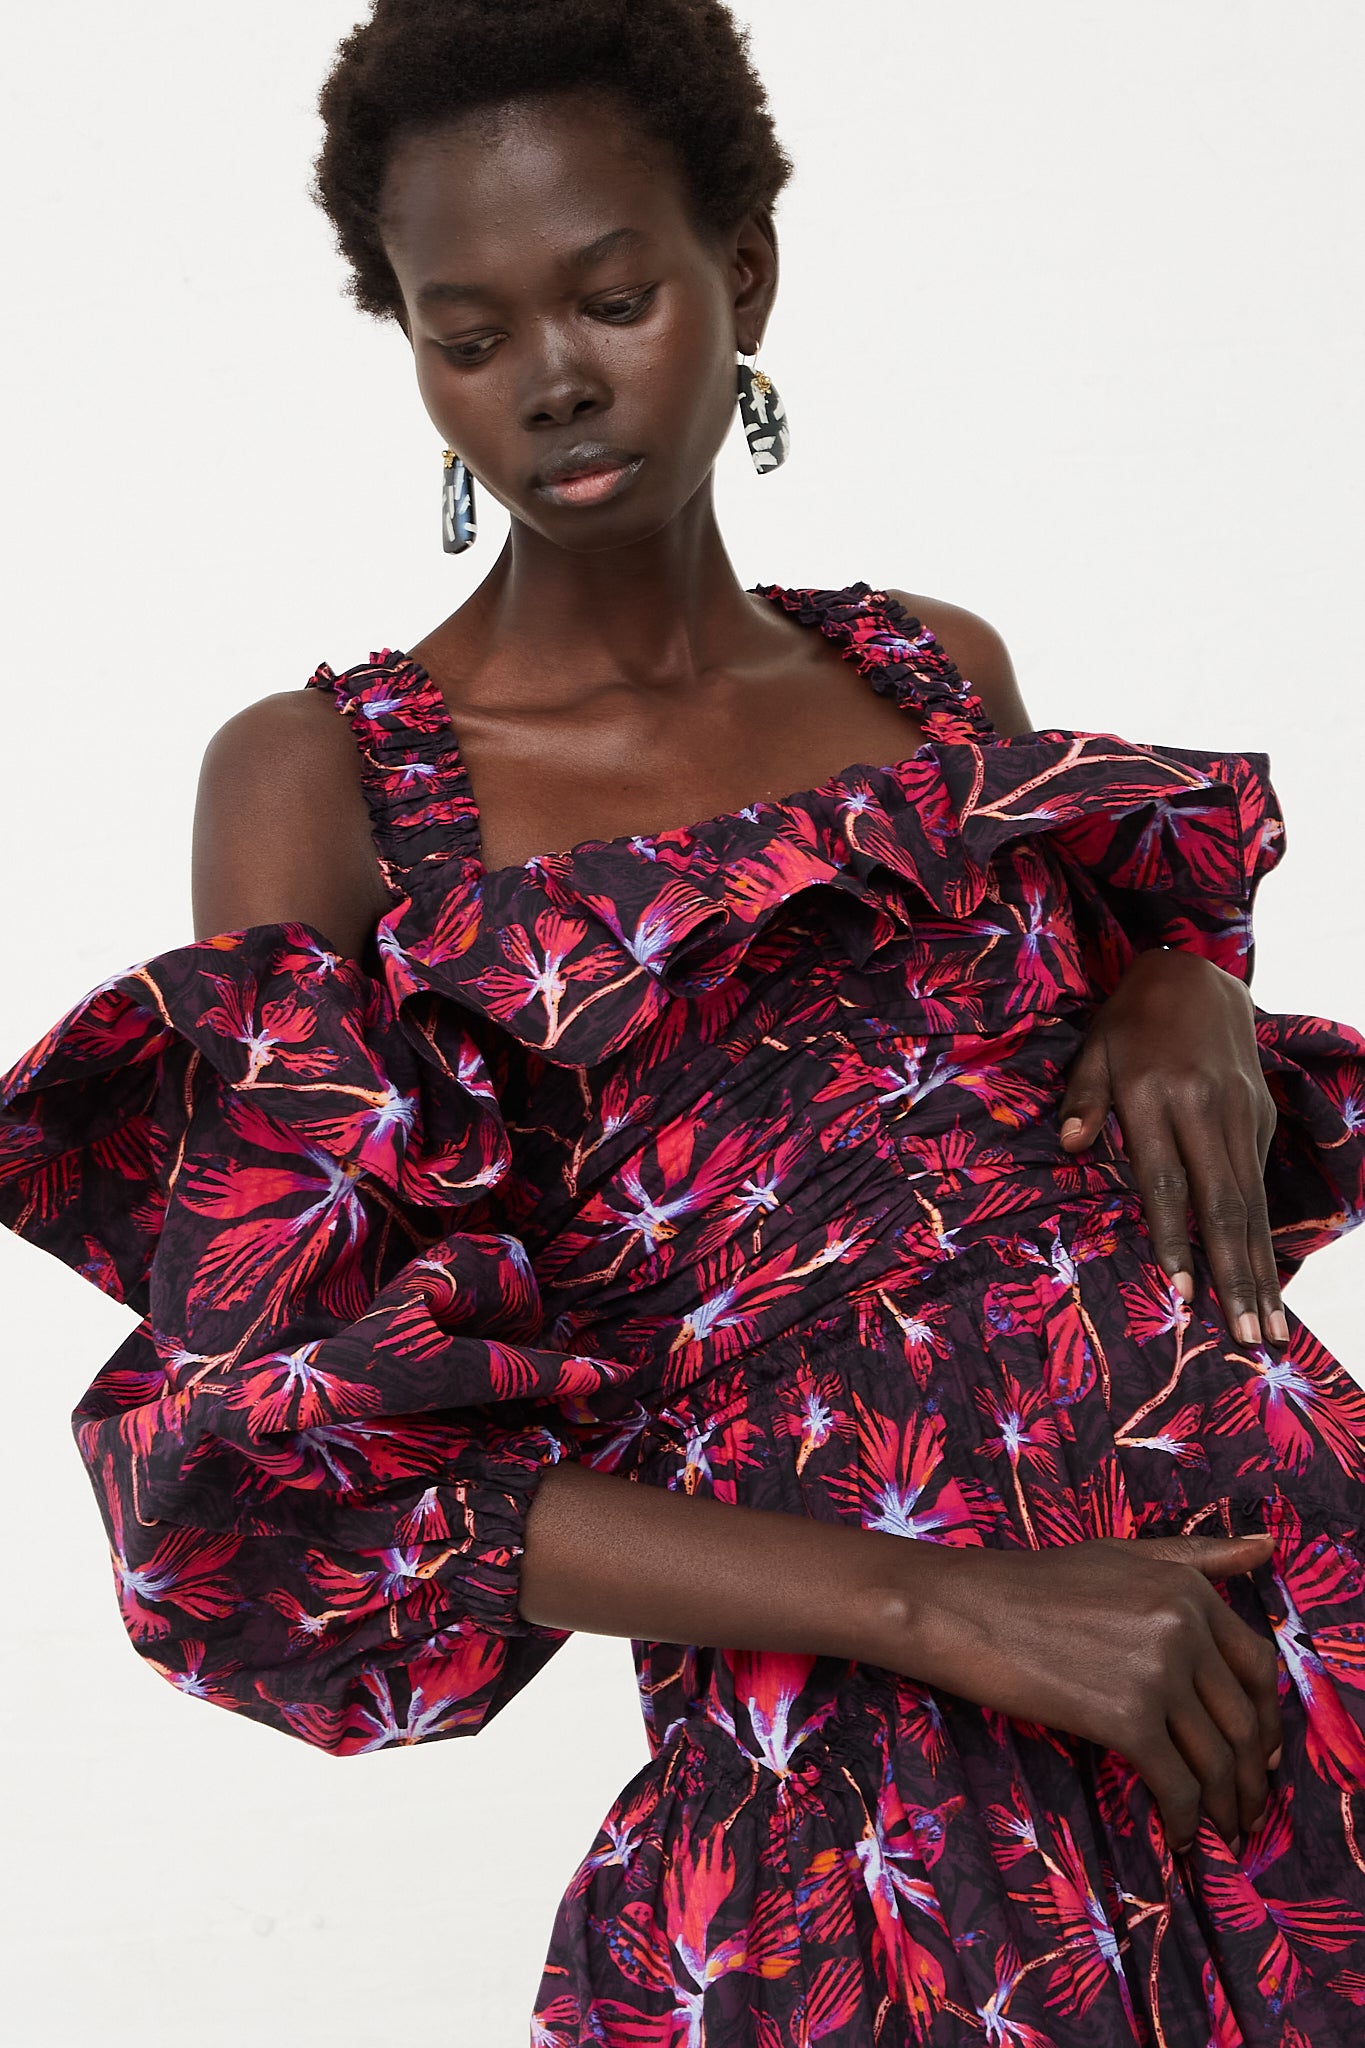 The model is wearing a Caprice Midi Dress in Zinnia by Ulla Johnson, featuring vivid shades of magenta and hyacinth floral print.